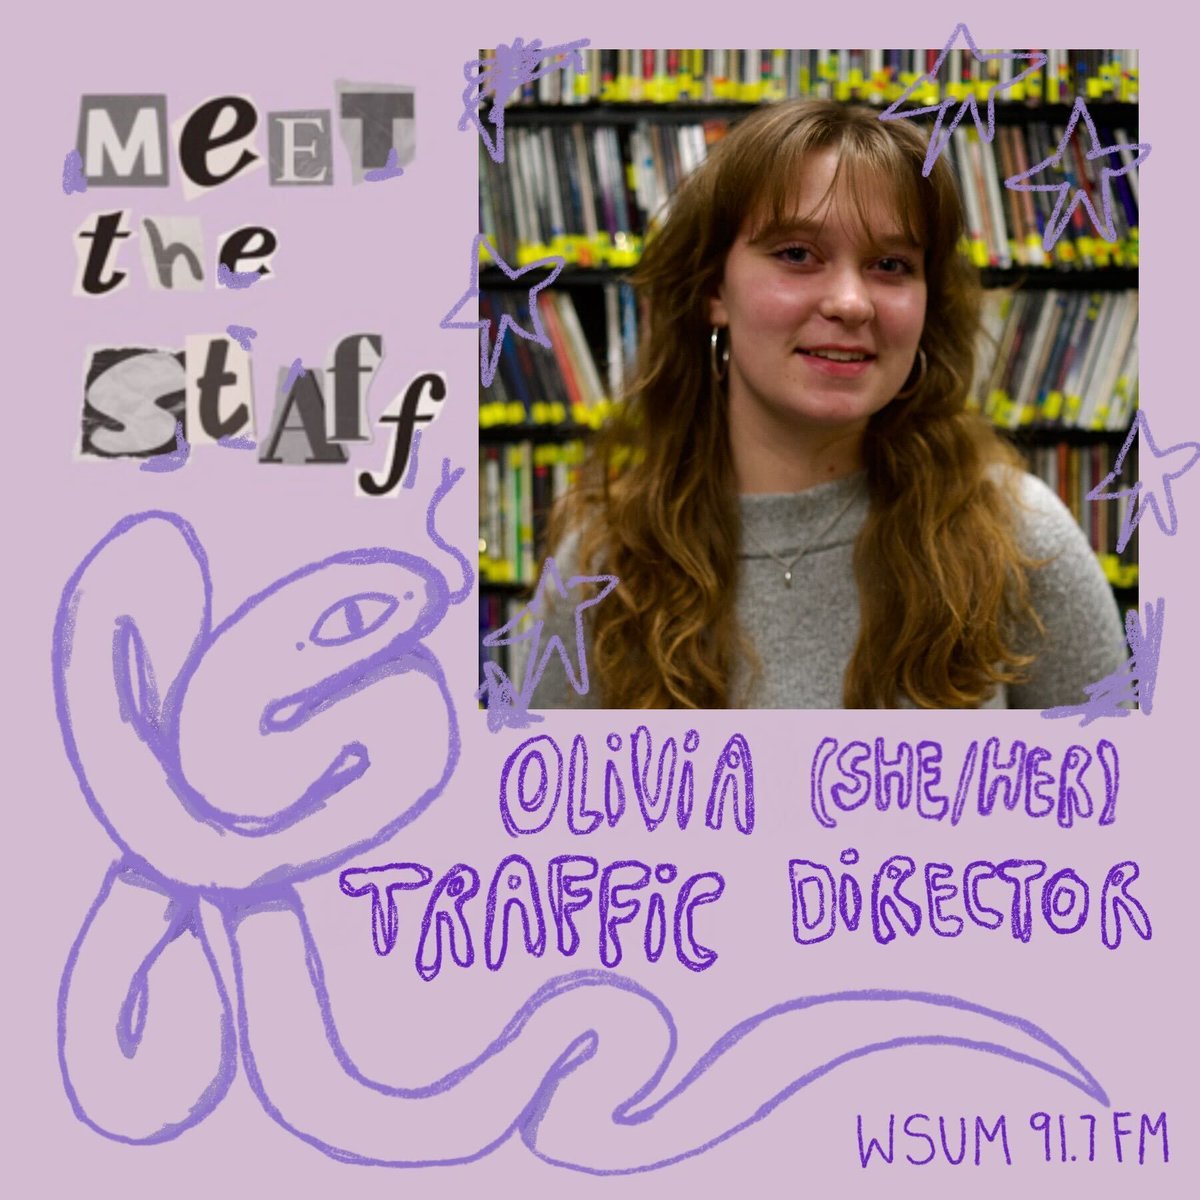 Meet The Staff!!! Traffic Director Olivia O'Callaghan (she/her) Tune into their show Kitchen Sink at 11AM on FreeFlow, 'different genre every week (play 'everything but the kitchen sink')'